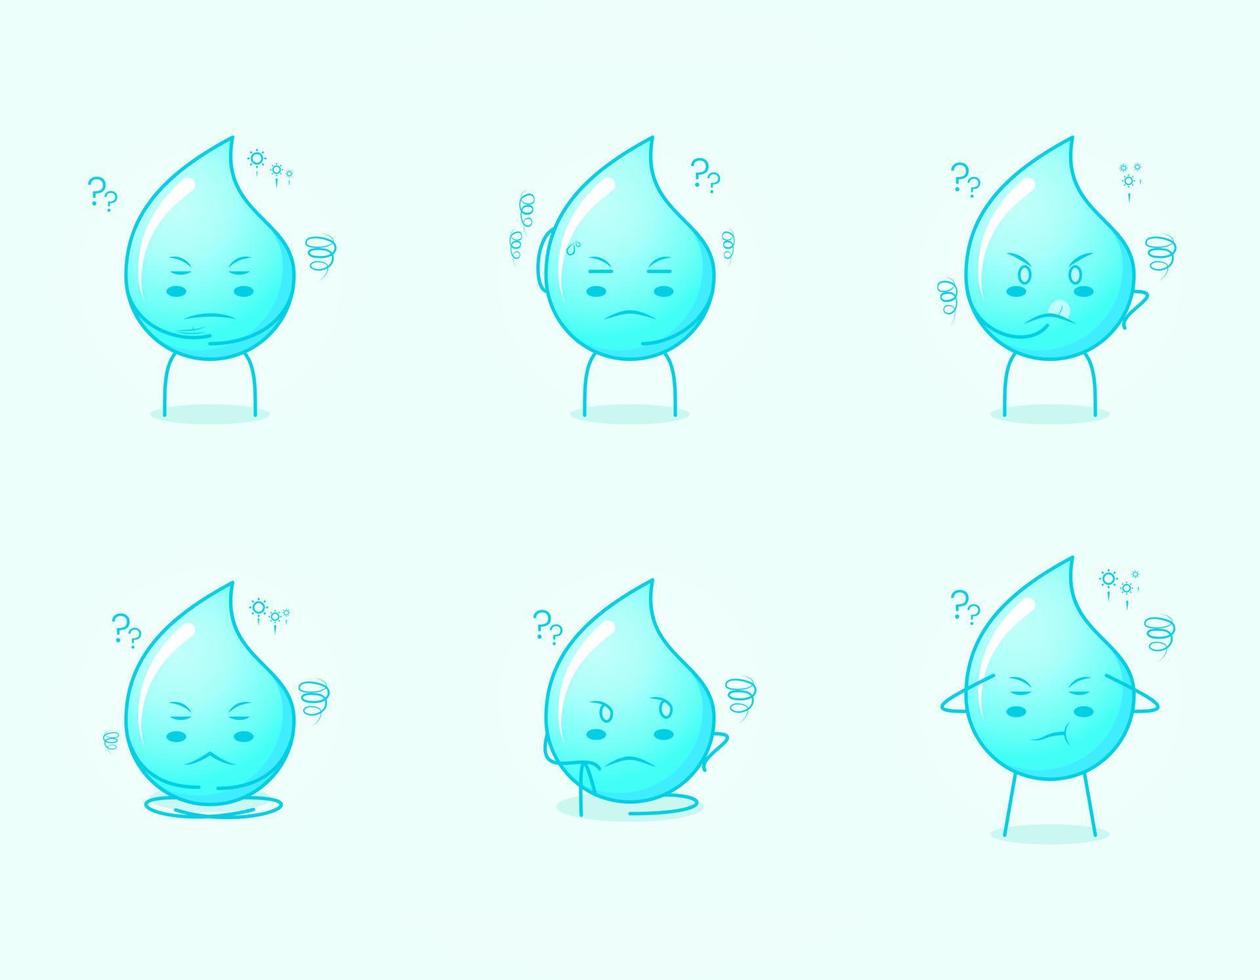 collection of cute water cartoon character with thinking expression. suitable for icon, logo, symbol and sign. such as emoticon, sticker, mascot or element logo vector